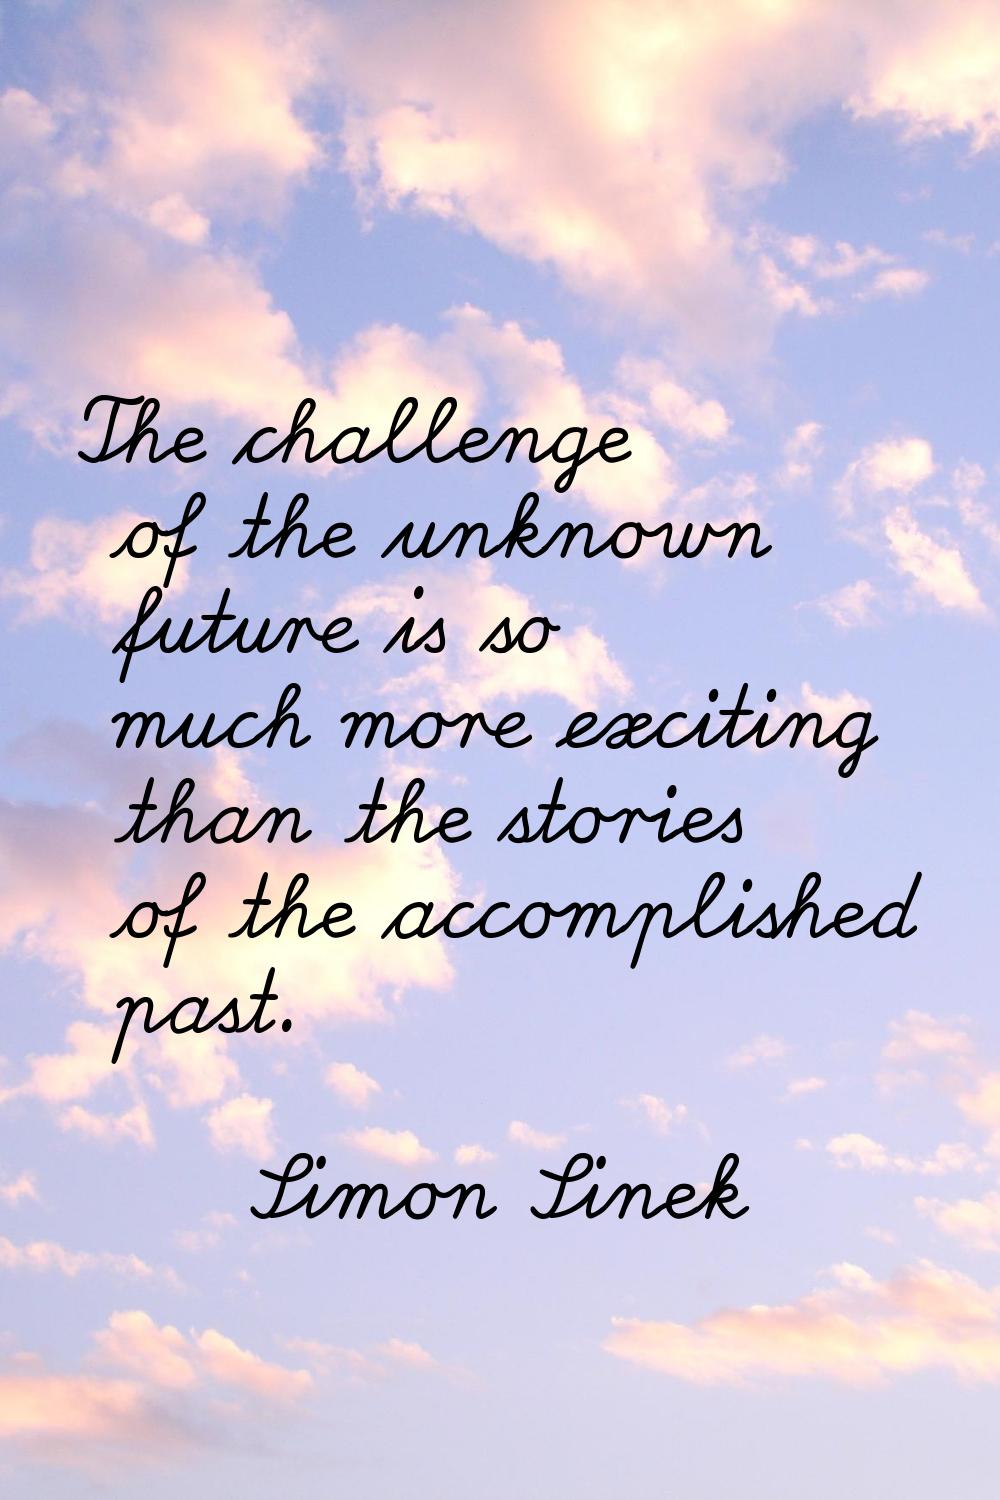 The challenge of the unknown future is so much more exciting than the stories of the accomplished p